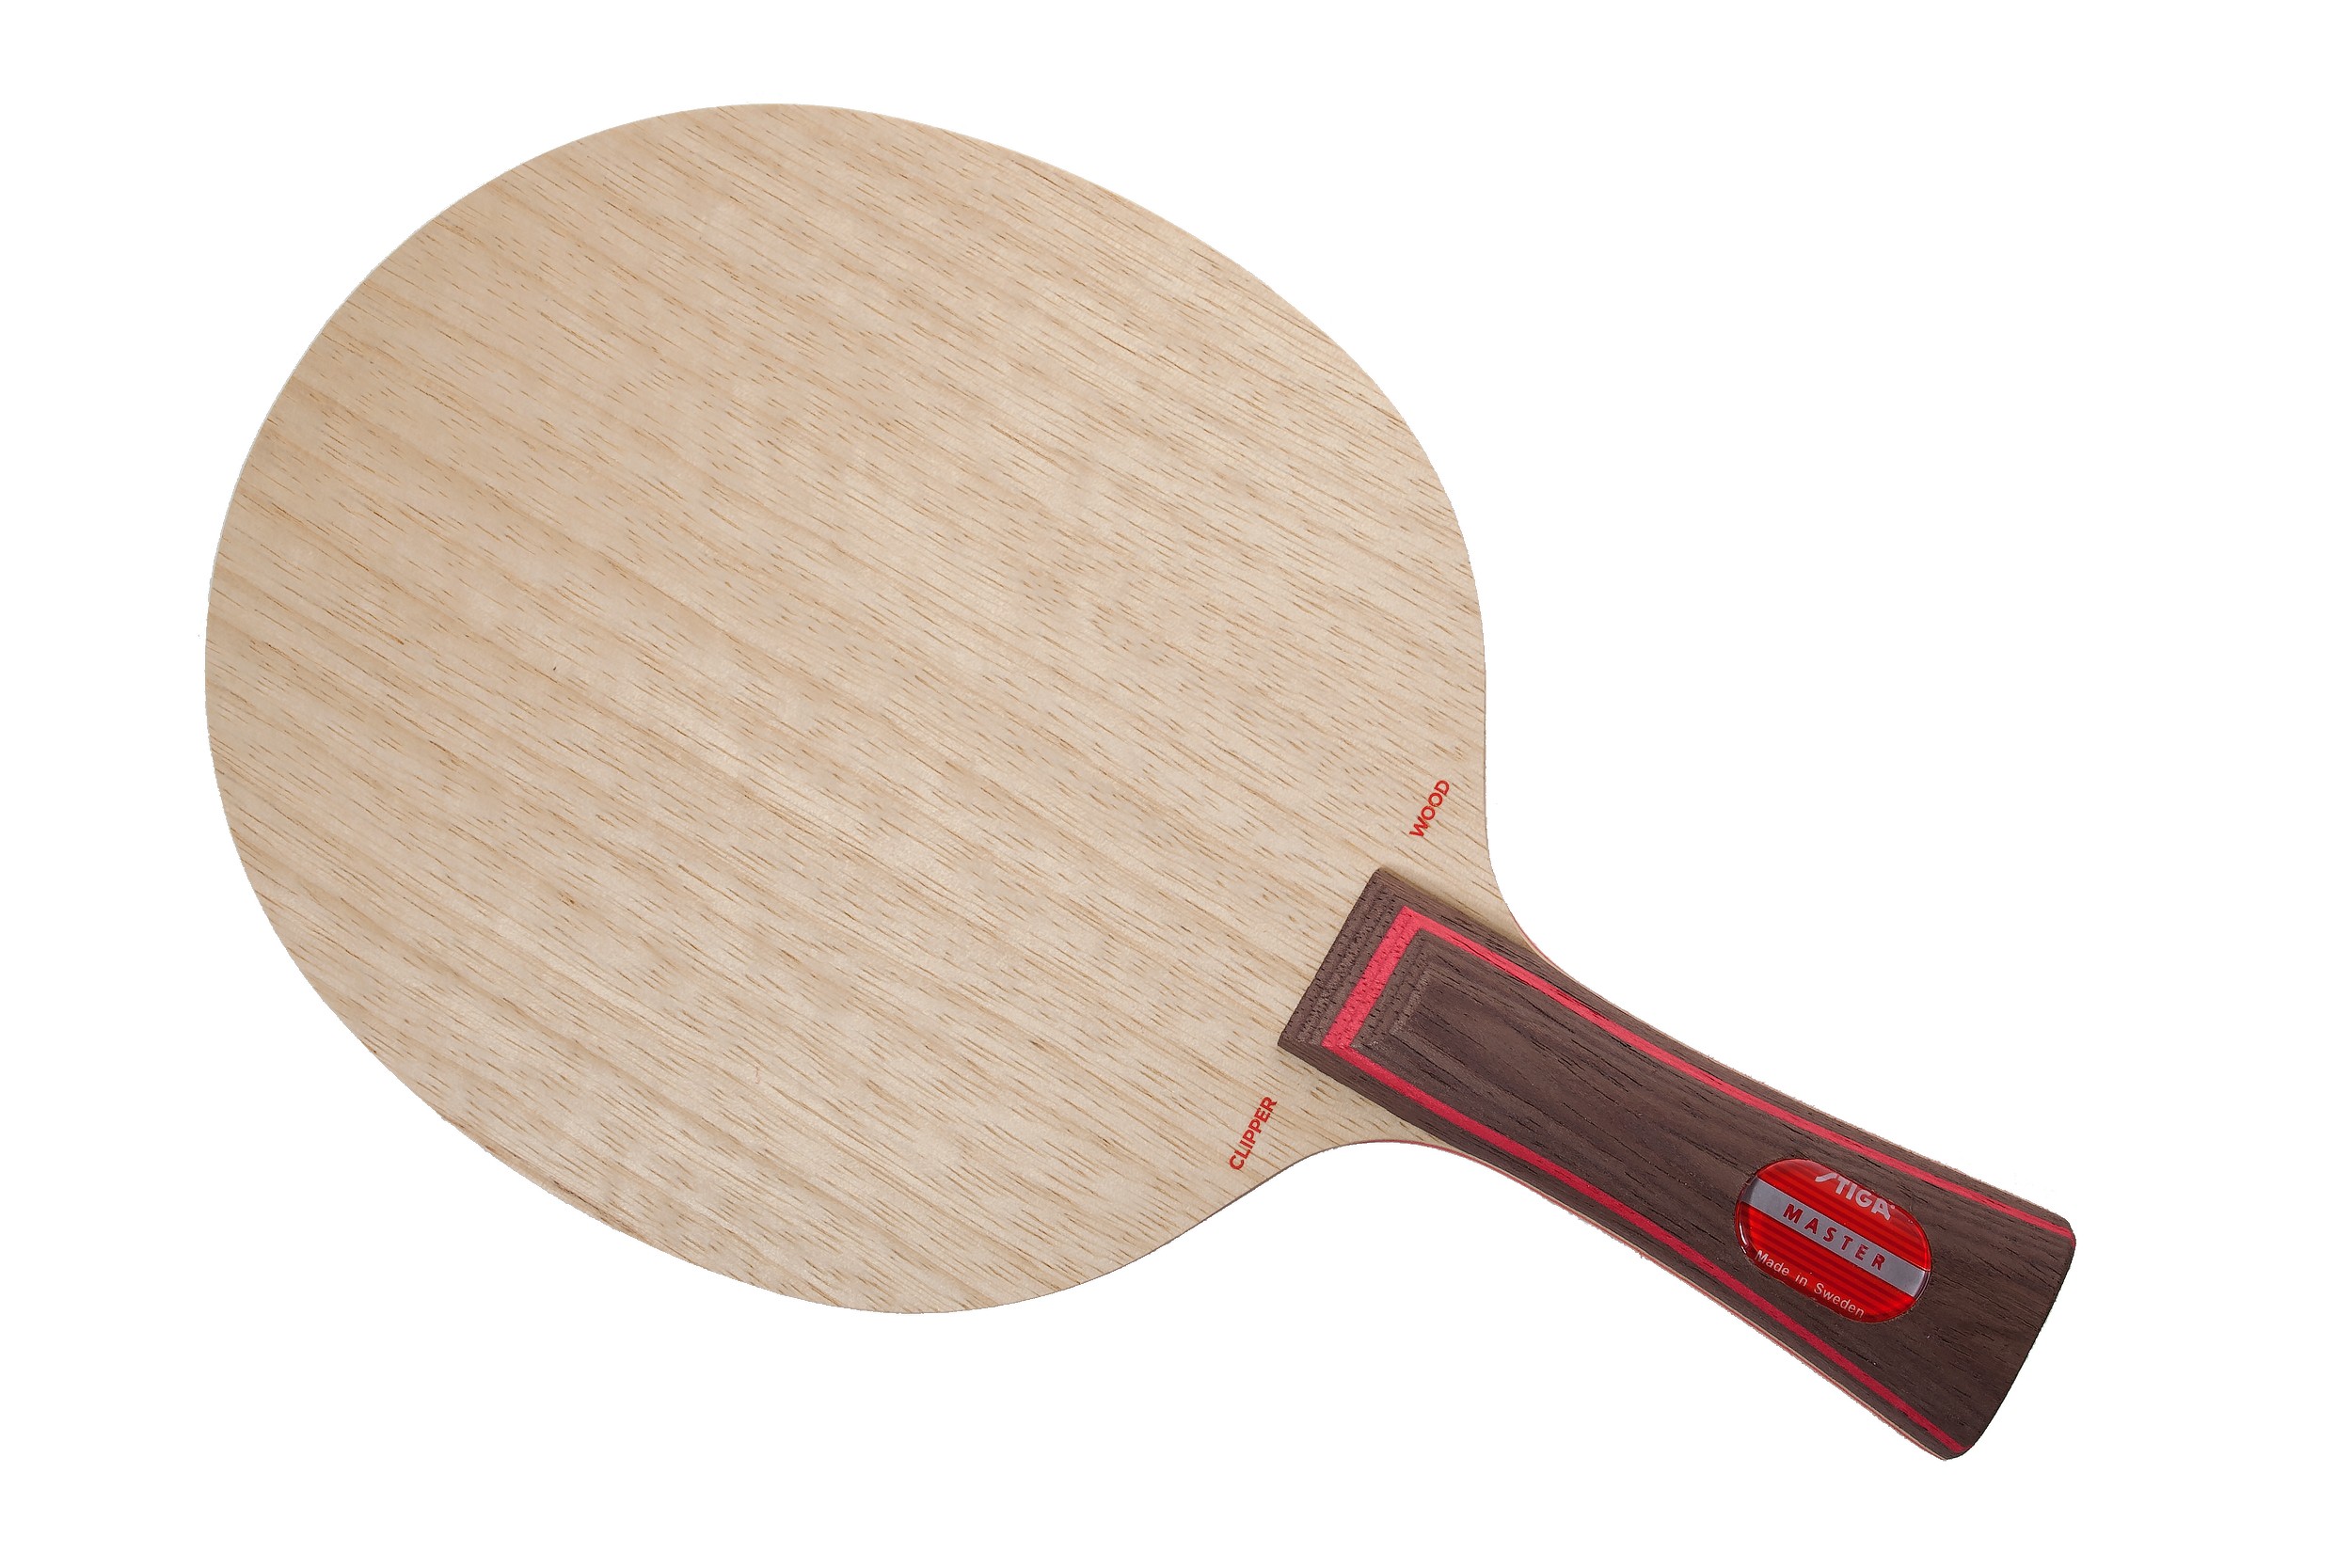 Advantages Of Getting The Stiga Table Tennis Blades